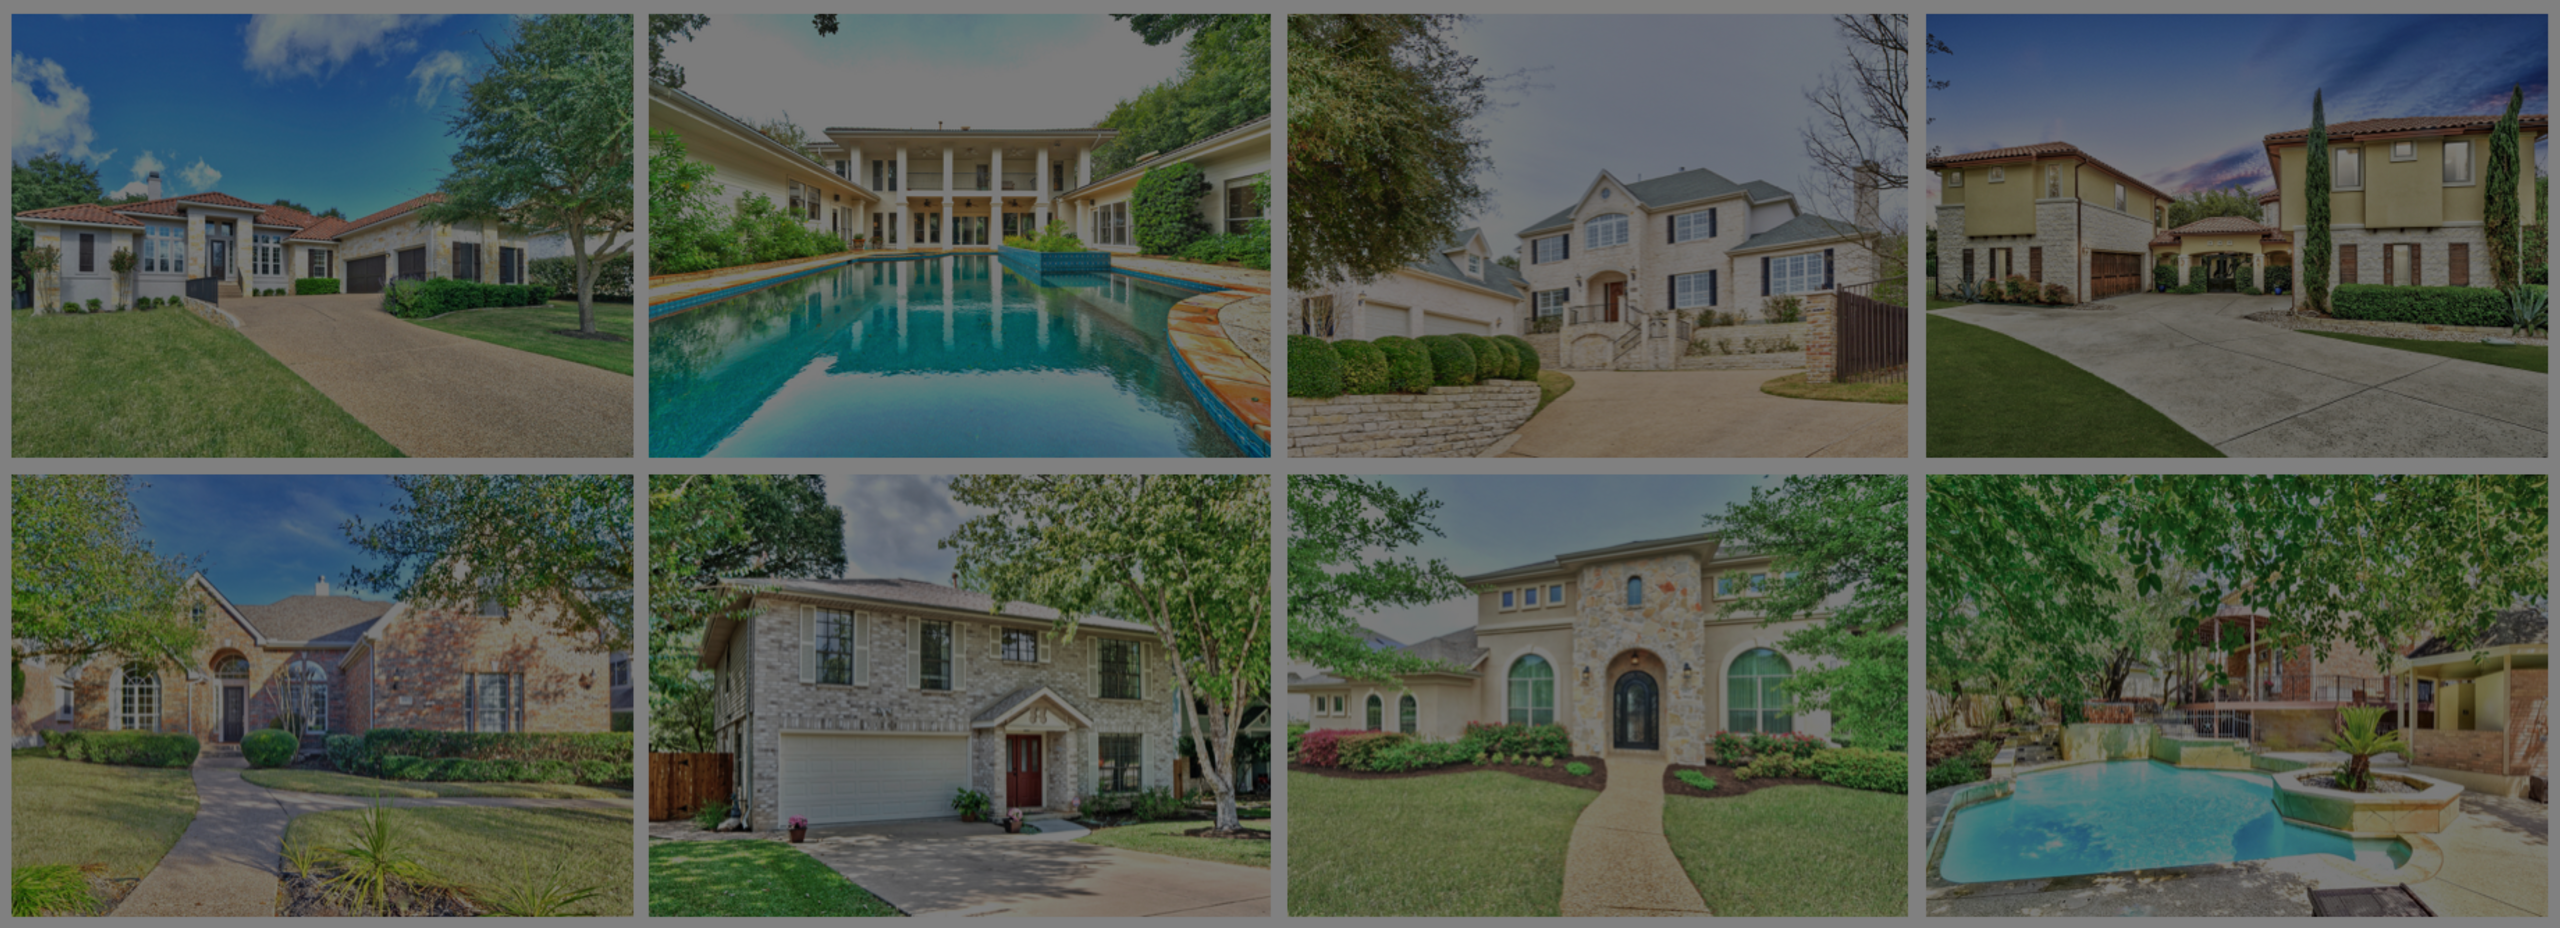 A FEW OF THE HOMES SOLD BY THE JULIE REISTRUP TEAM